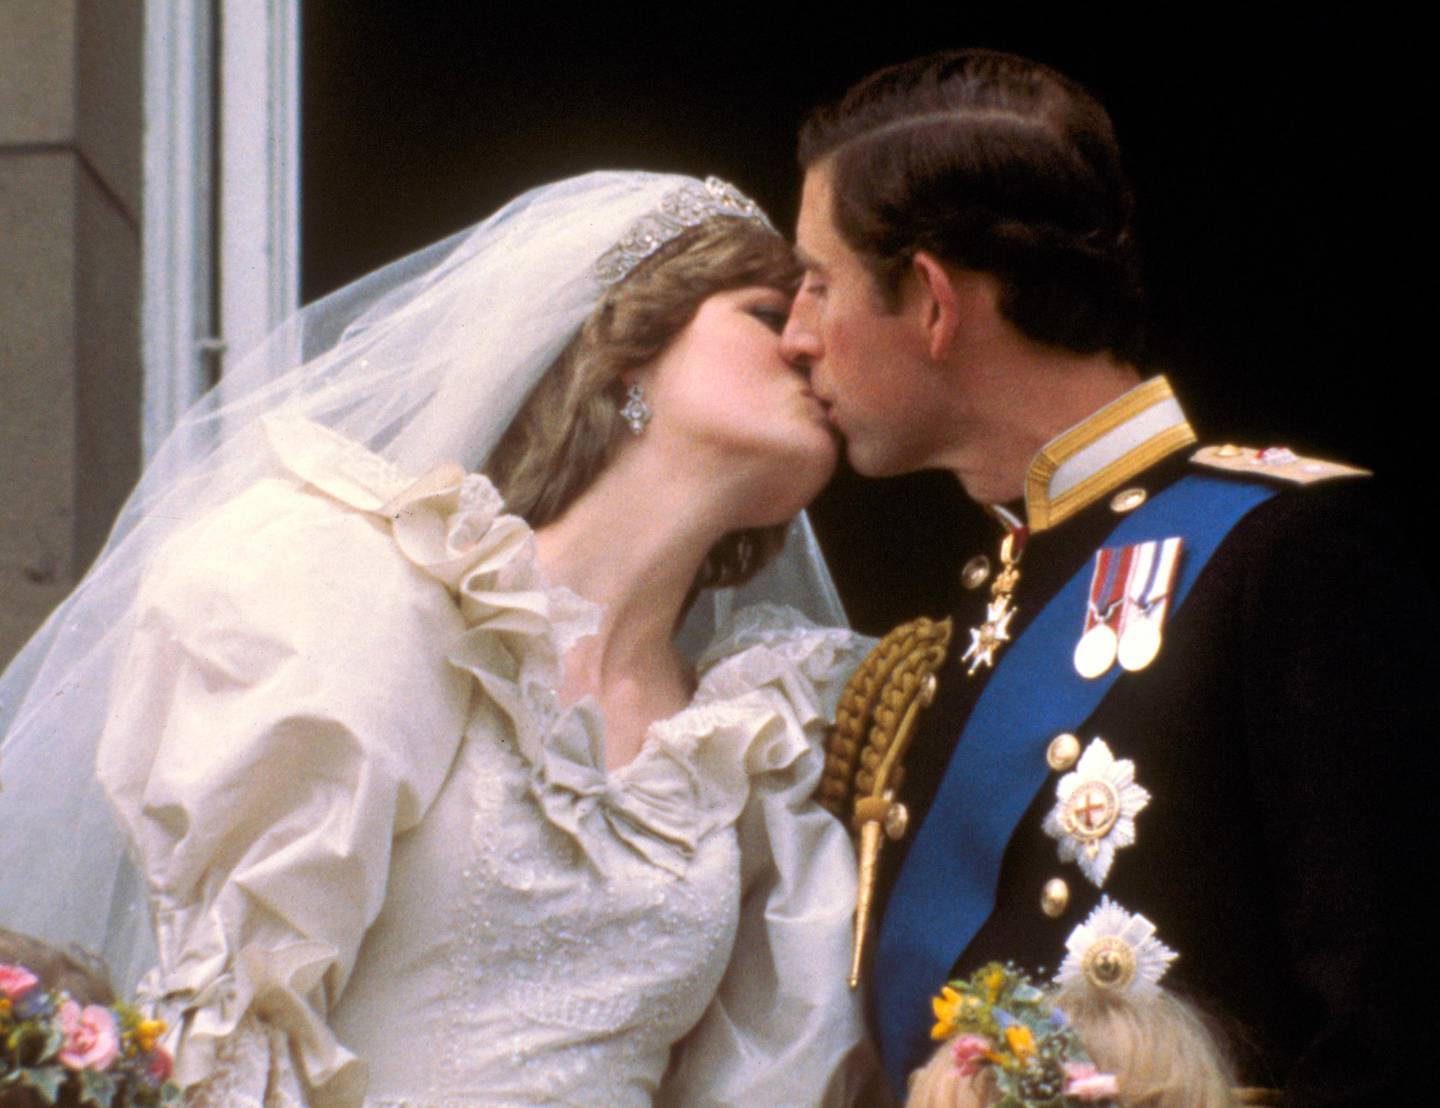 FILE - This is July 29, 1981 file photo of Britain's Prince Charles kisses his bride, Princess Diana , on the balcony of Buckingham Palace in London, after their wedding. FX has announced a 10-episode series that will spotlight the doomed royal couple Charles and Diana. It is scheduled to air in 2018. No cast members were disclosed by the network. (AP Photo, File )